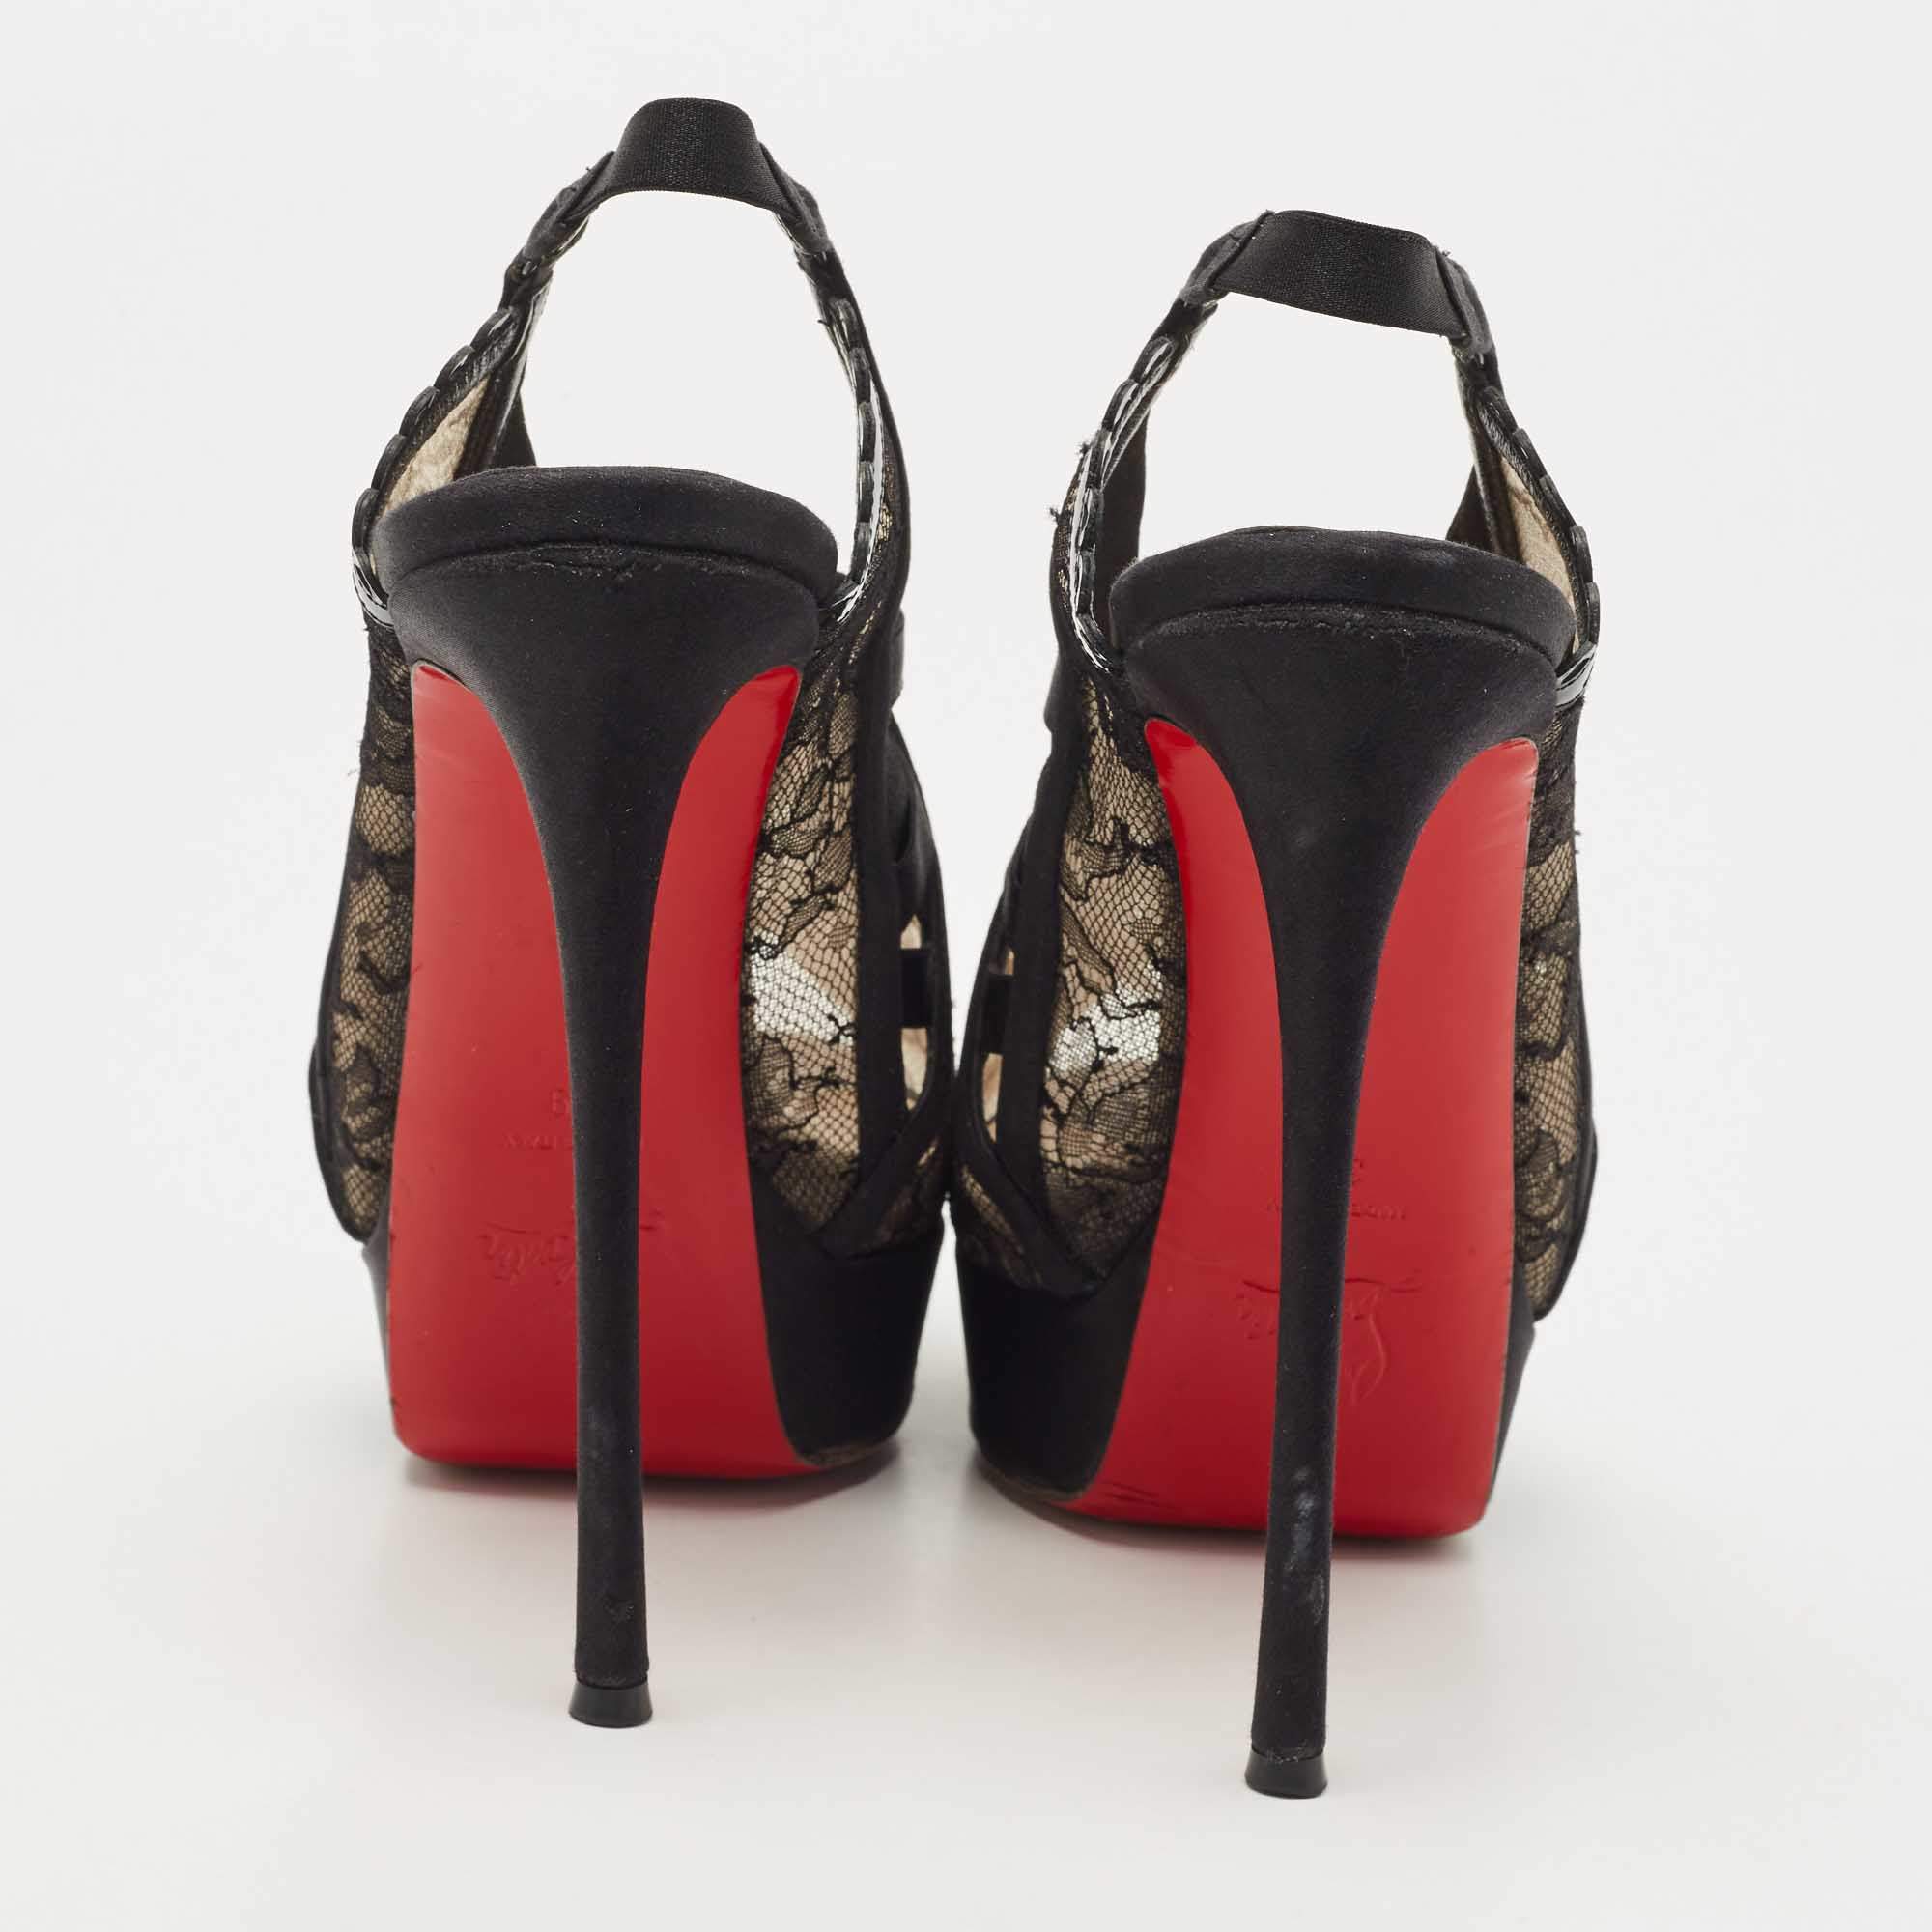 Christian Louboutin Black Cage Slingback 70 Pumps - Size 7.5 / 37.5 (S –  LuxeDH